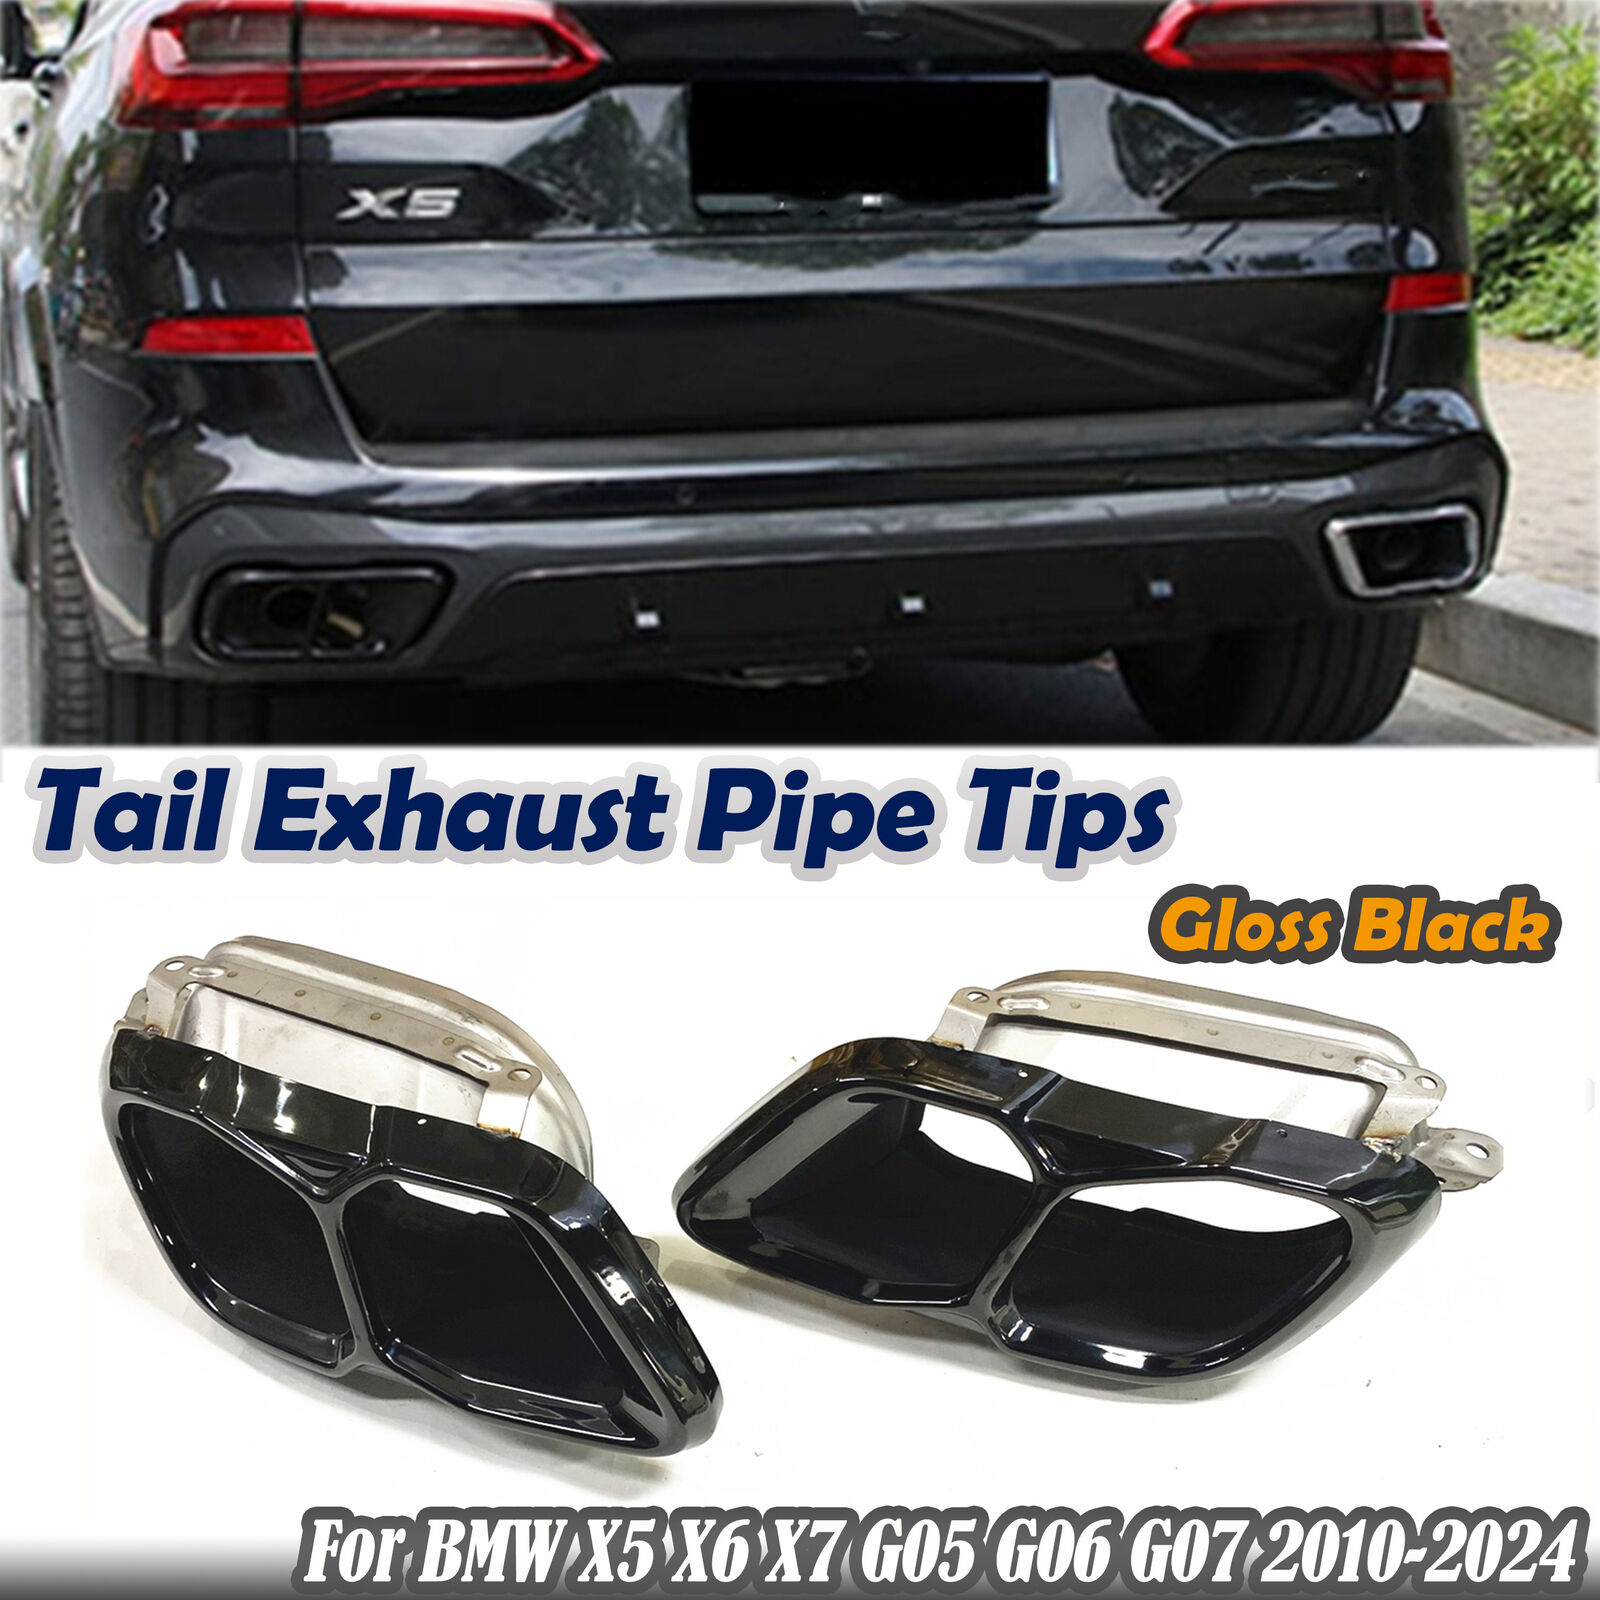 For BMW X5 X6 X7 G05 G06 G07 2010-2024 Rear Bumper Tail Exhaust Pipe Tips Black